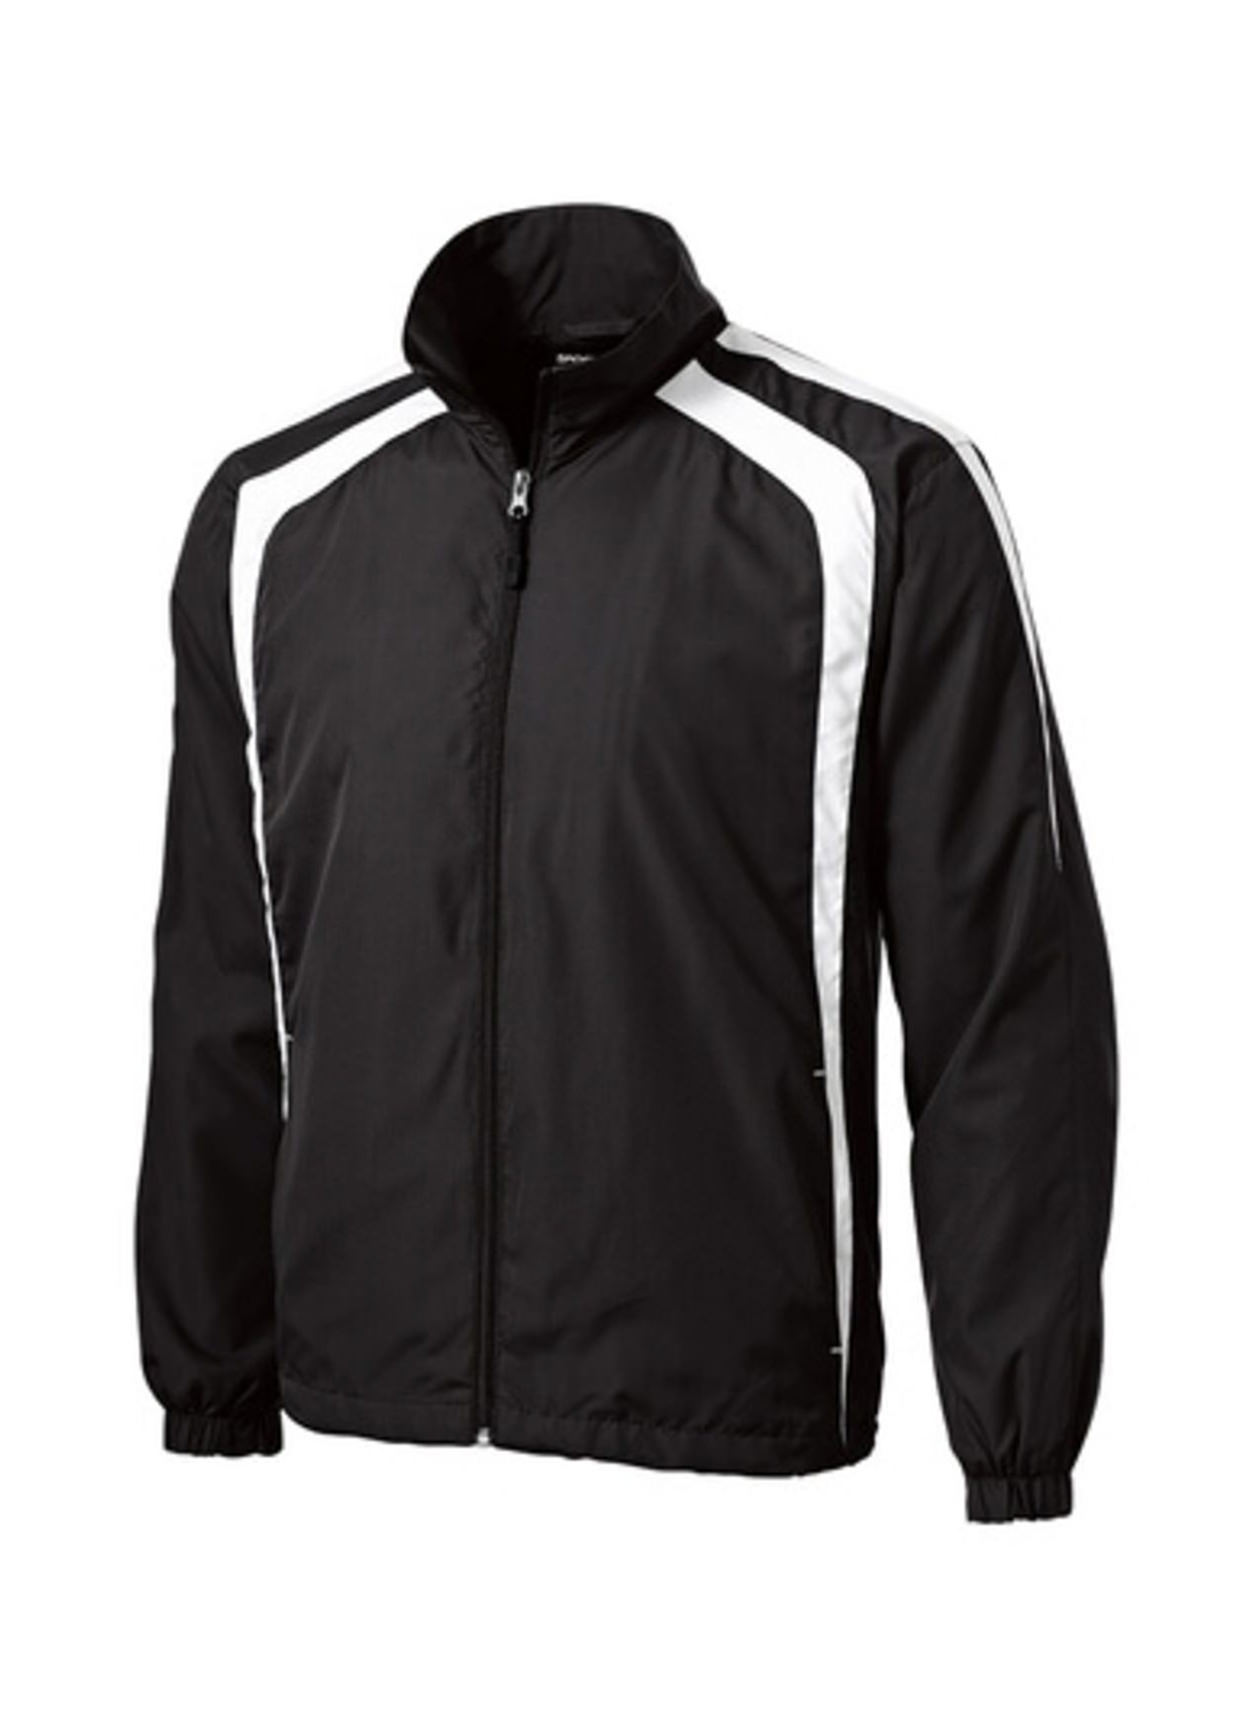 Under Armour Men's Forest Green Rival Knit Jacket